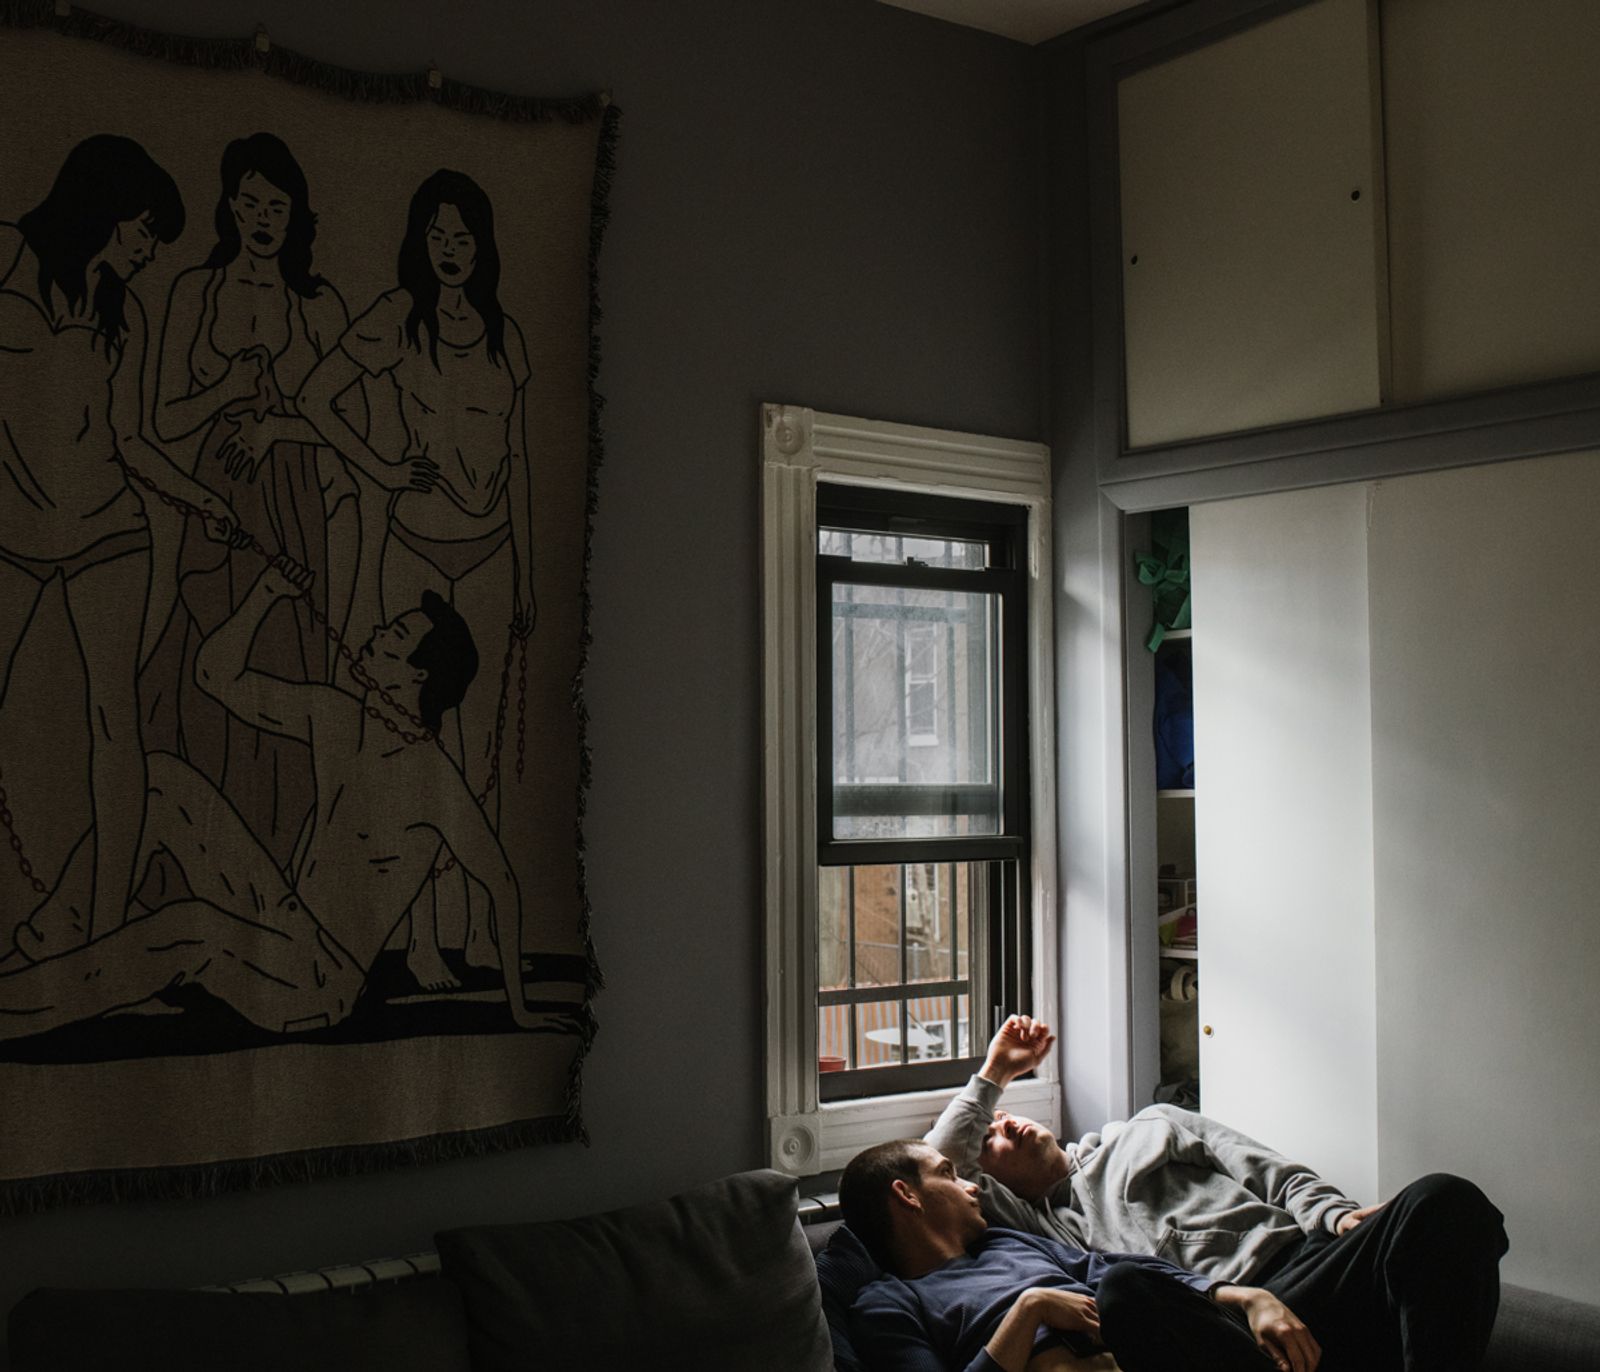 © Gili Benita - Sam (24 (R), and Eyal Chowers (25) (L), lying on their couch inside their Ridgewood apartment in NYC, April 5th, 2020.